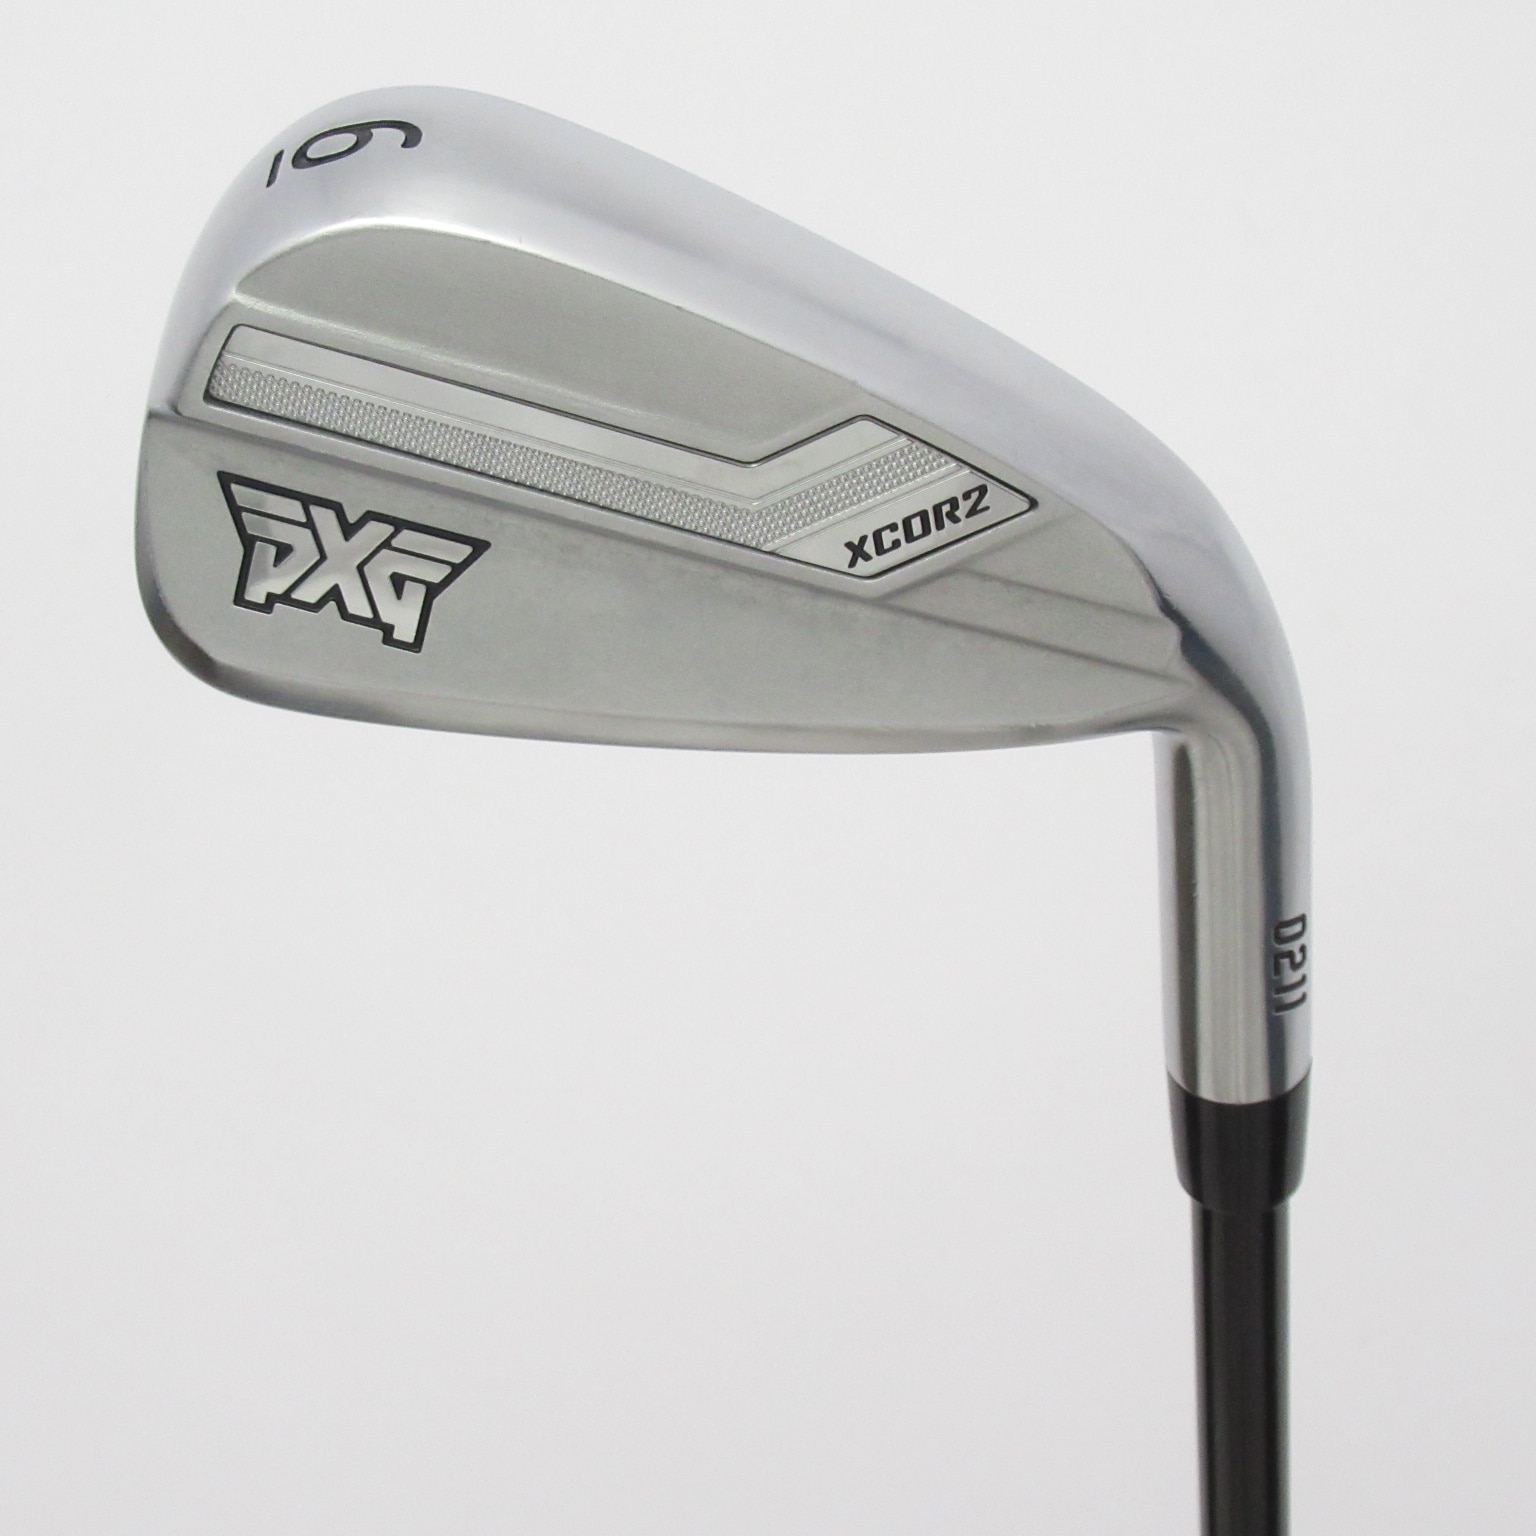 PXG 0211 XCOR2 中古アイアンセット ピーエックスジー PXG 通販｜GDO 